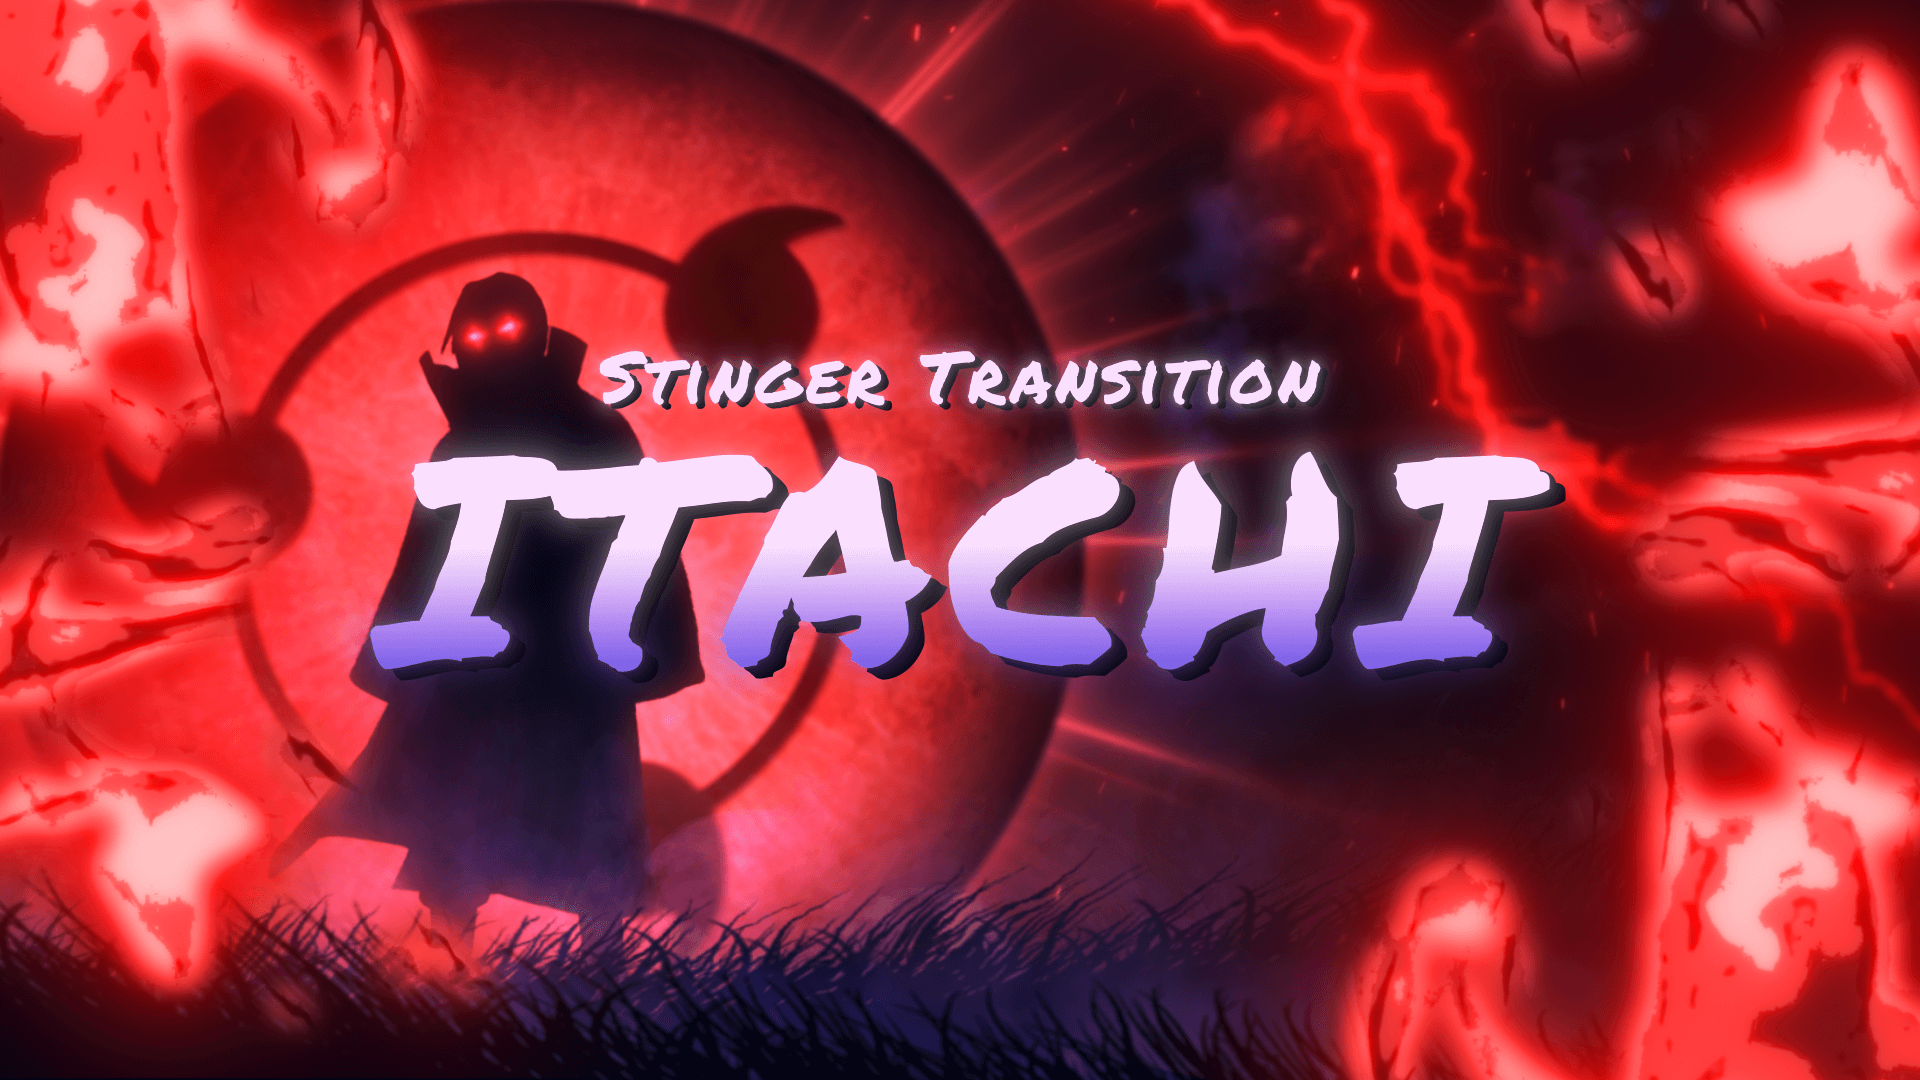 Itachi - Stinger Transition for Twitch, Youtube and Facebook